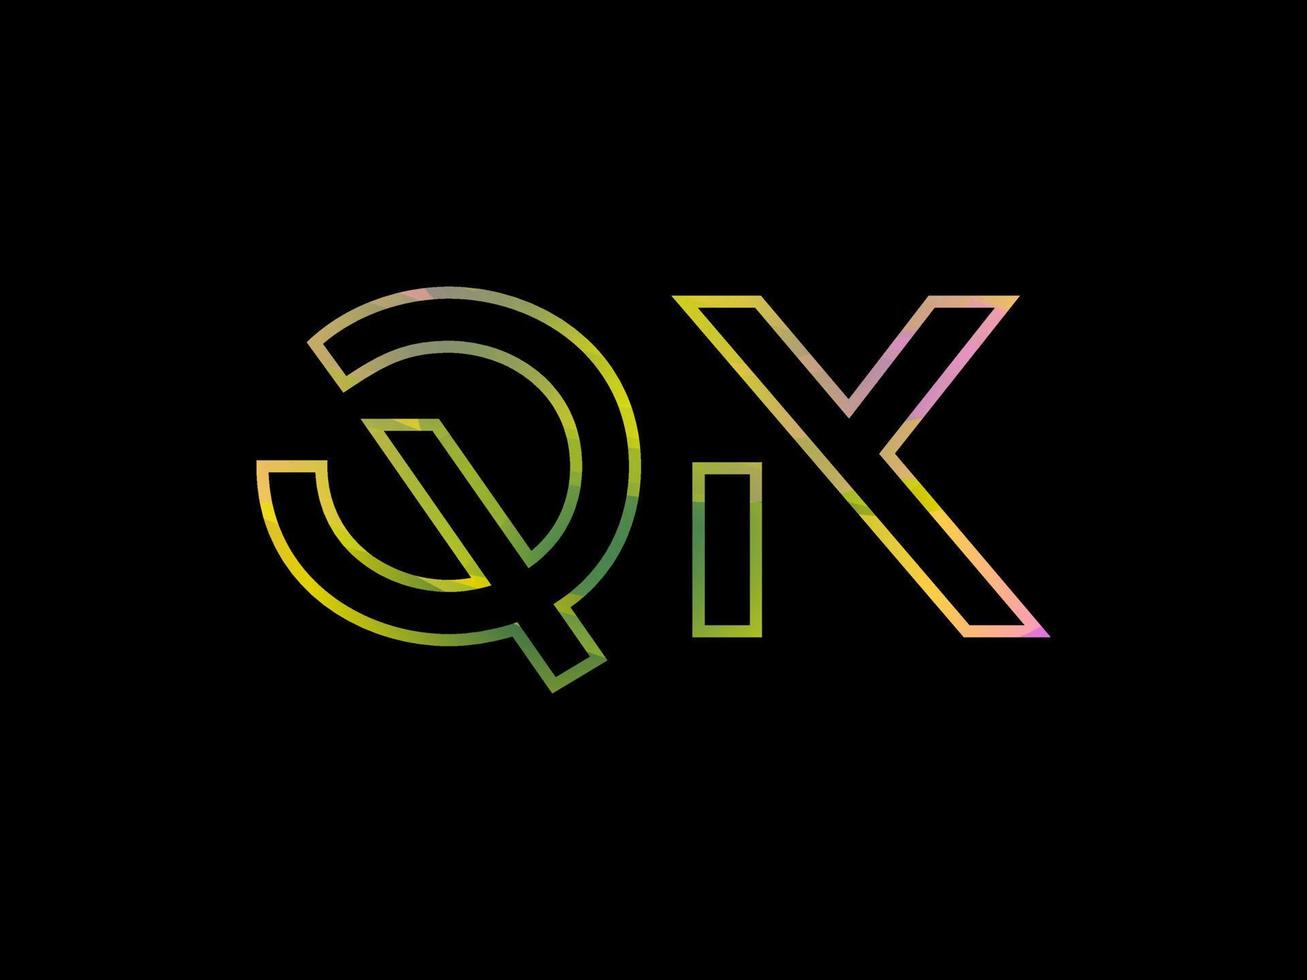 QK Letter Logo With Colorful Rainbow Texture Vector. Pro vector. vector